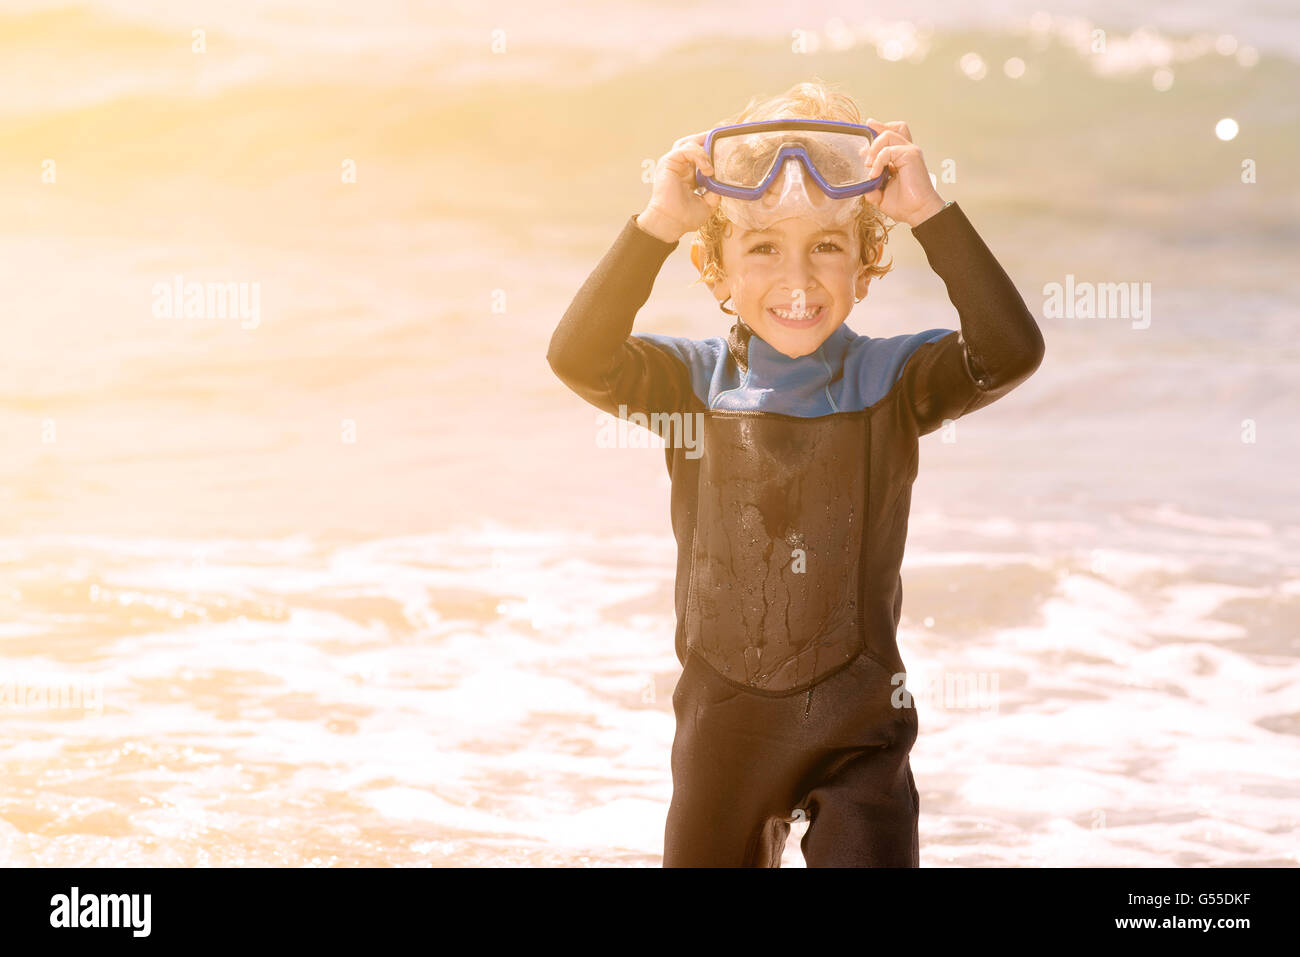 cute little kid smiling with snorkel in the waves Stock Photo